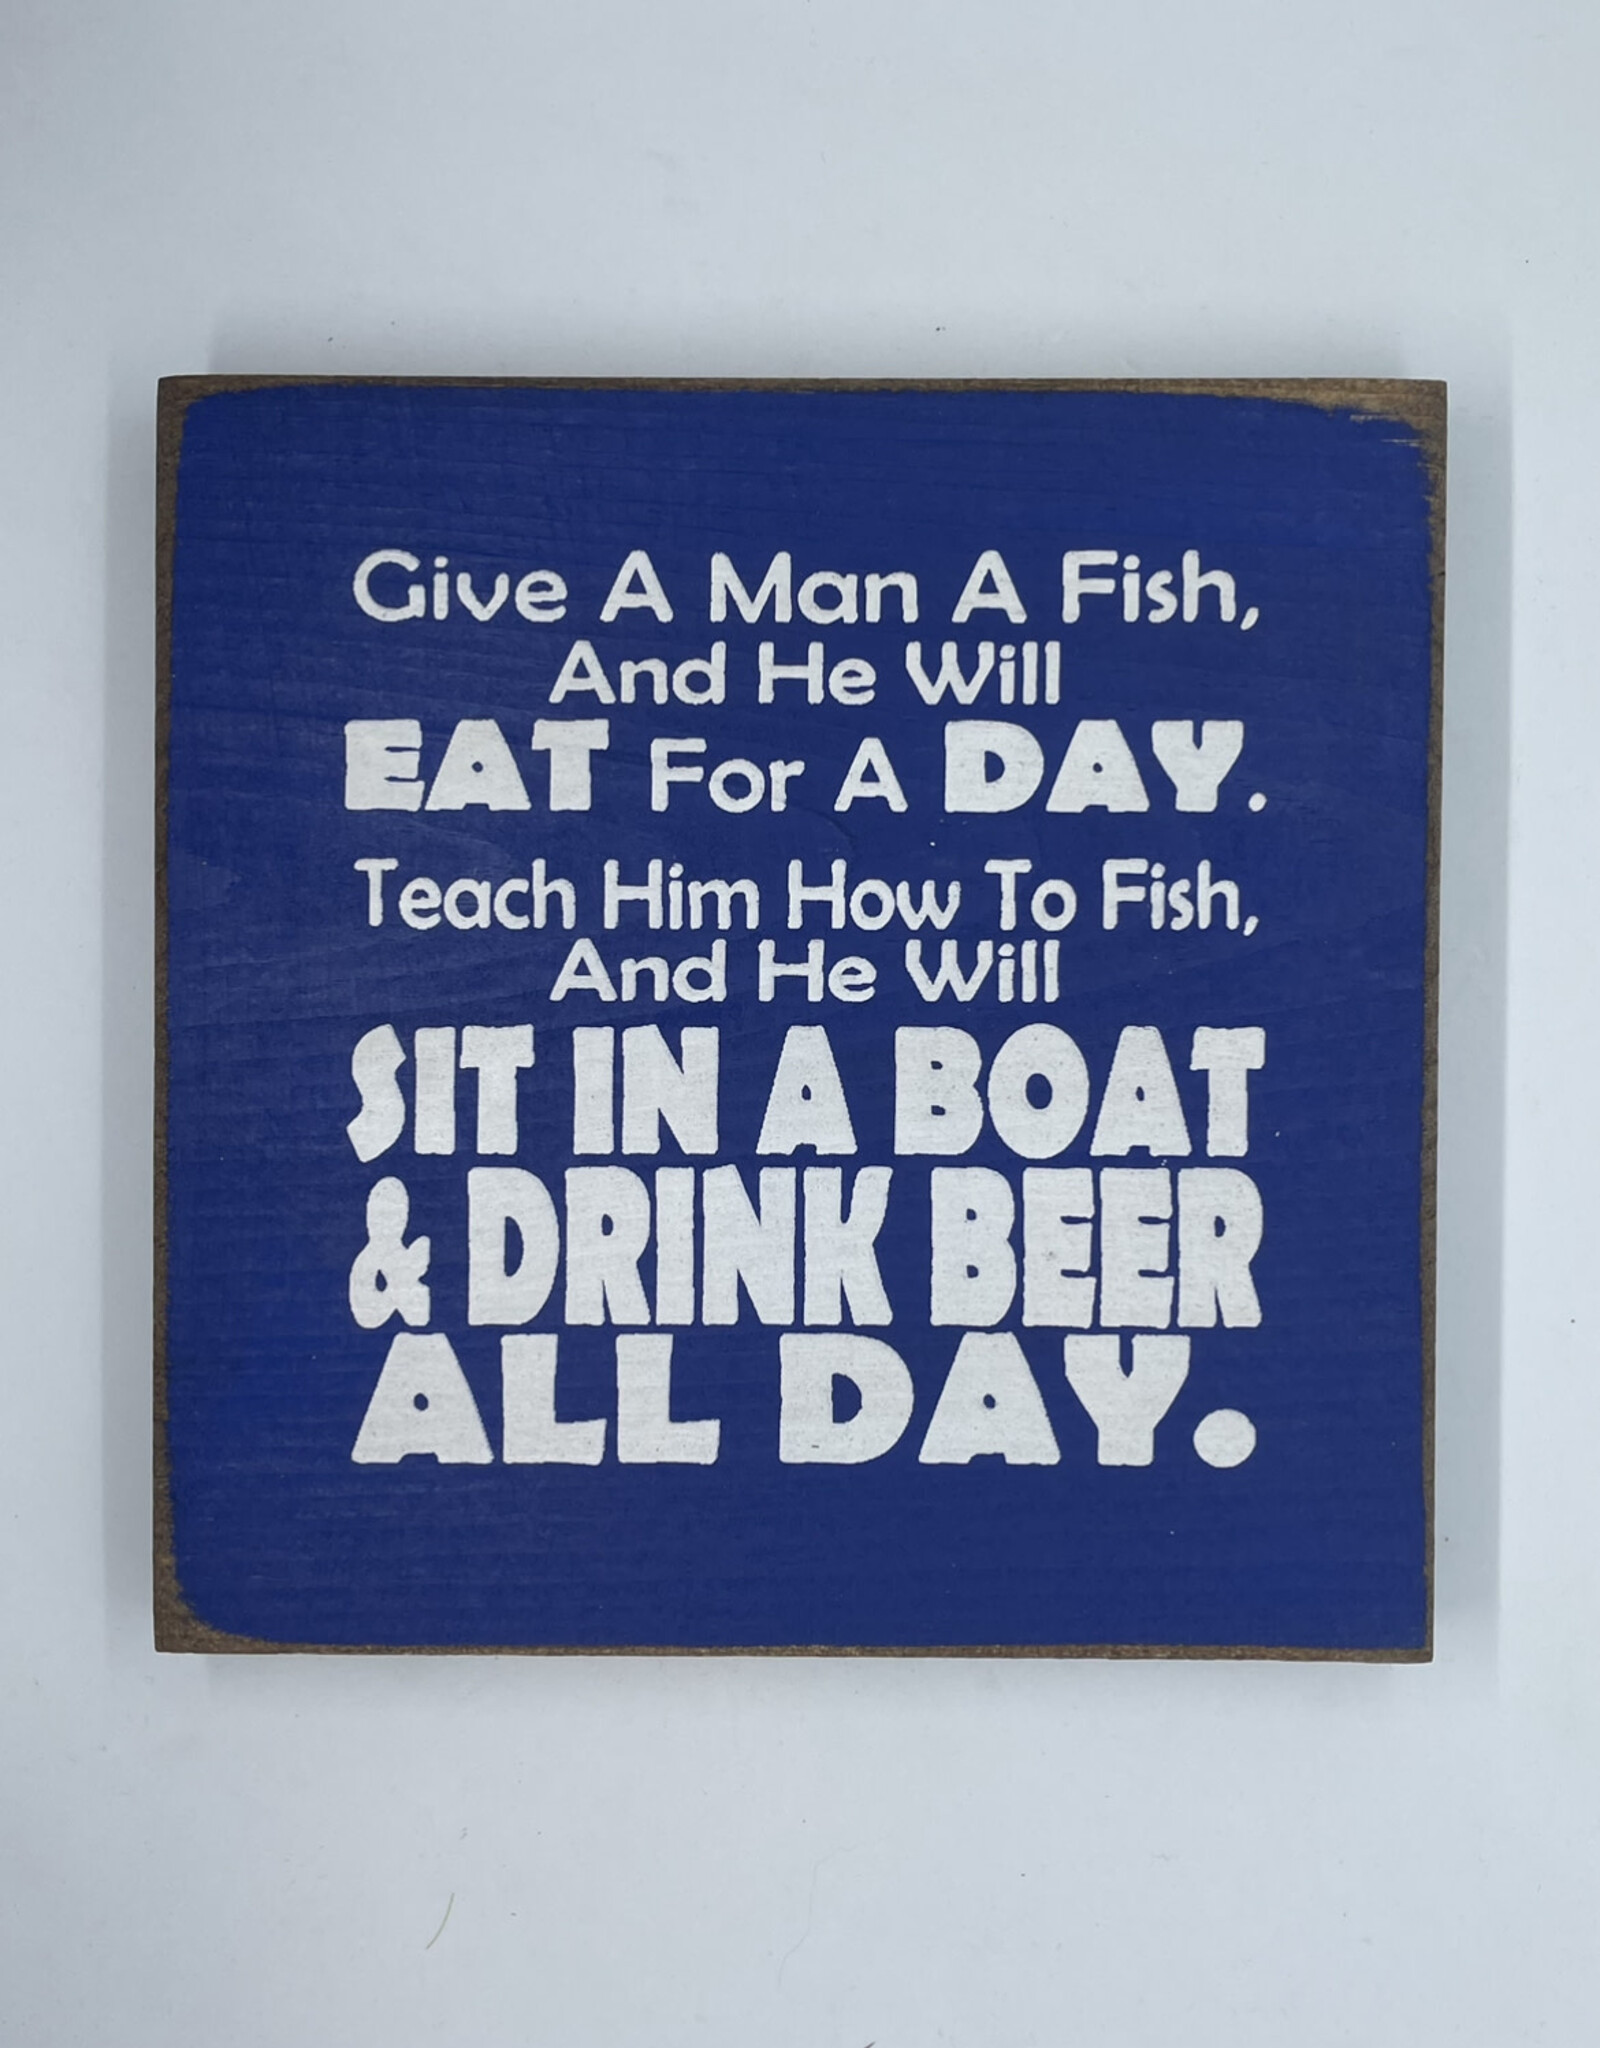 Sawdust City Give A Man A Fish Sign